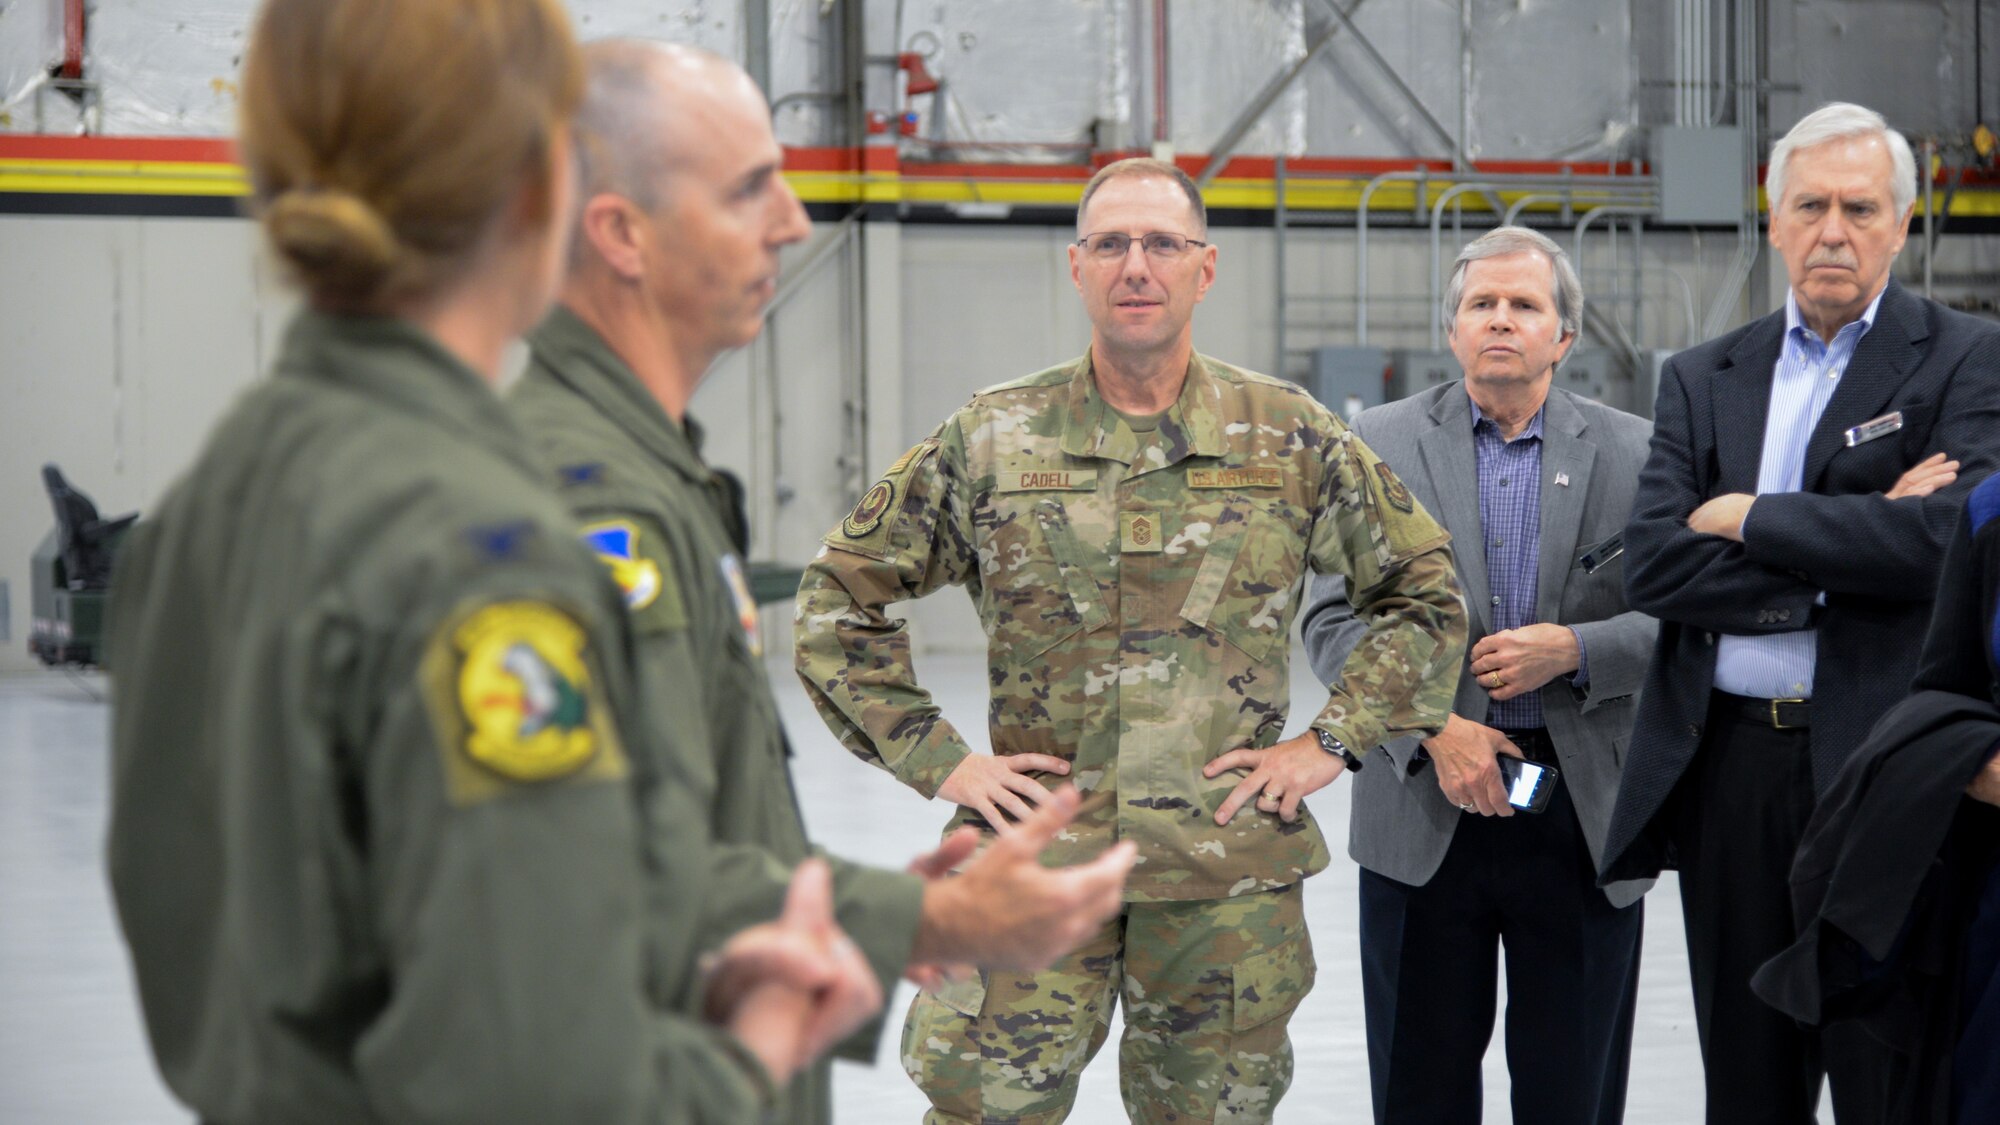 Chief Master Sgt. Stanley C. Cadell, command chief for Air Force Materiel Command, during a base visit Oct. 21, 2019, at Hill Air Force Base, Utah. Cadell, Gen. Arnold W. Bunch, Jr., commander for AFMC, and community leaders from around the country visited Hill as part of the command’s Civic Leader Program. The CLP members meet twice annually to hear updates on AFMC and Air Force issues. (U.S. Air Force photo by Cynthia Griggs)